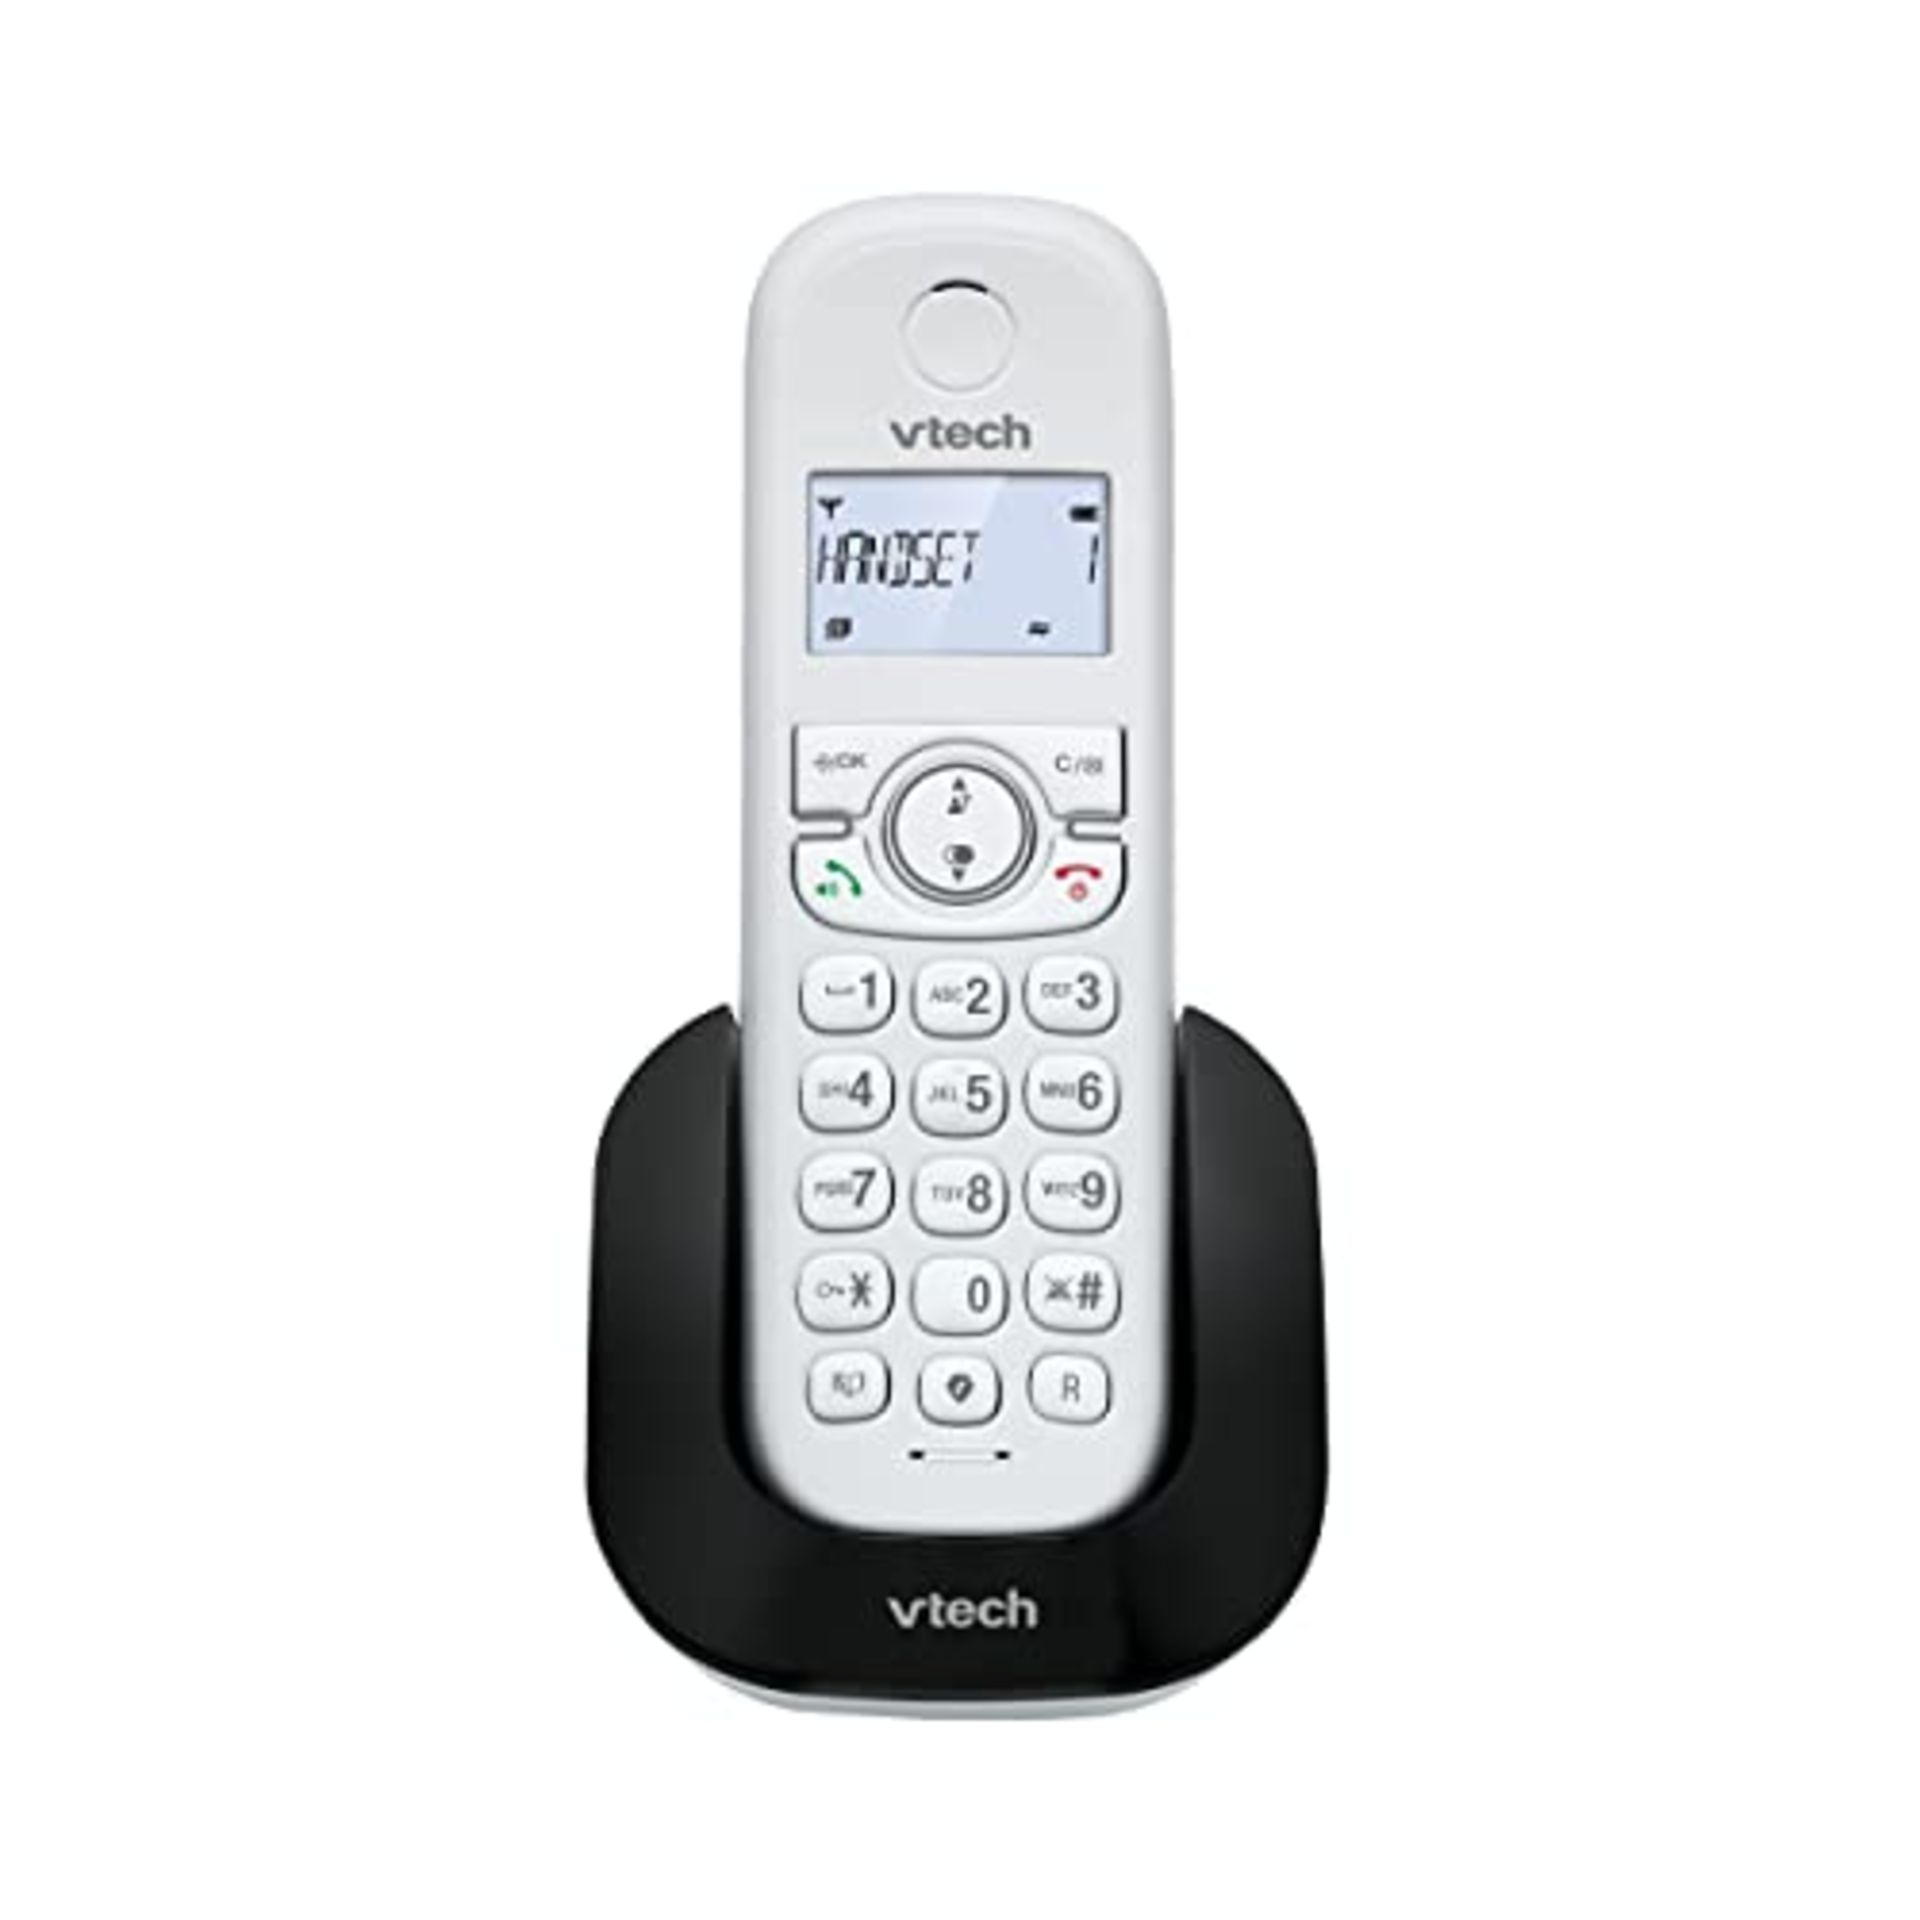 VTech CS1500 Dual-Charging DECT Cordless Phone with Call Block,Landline House Phone wi